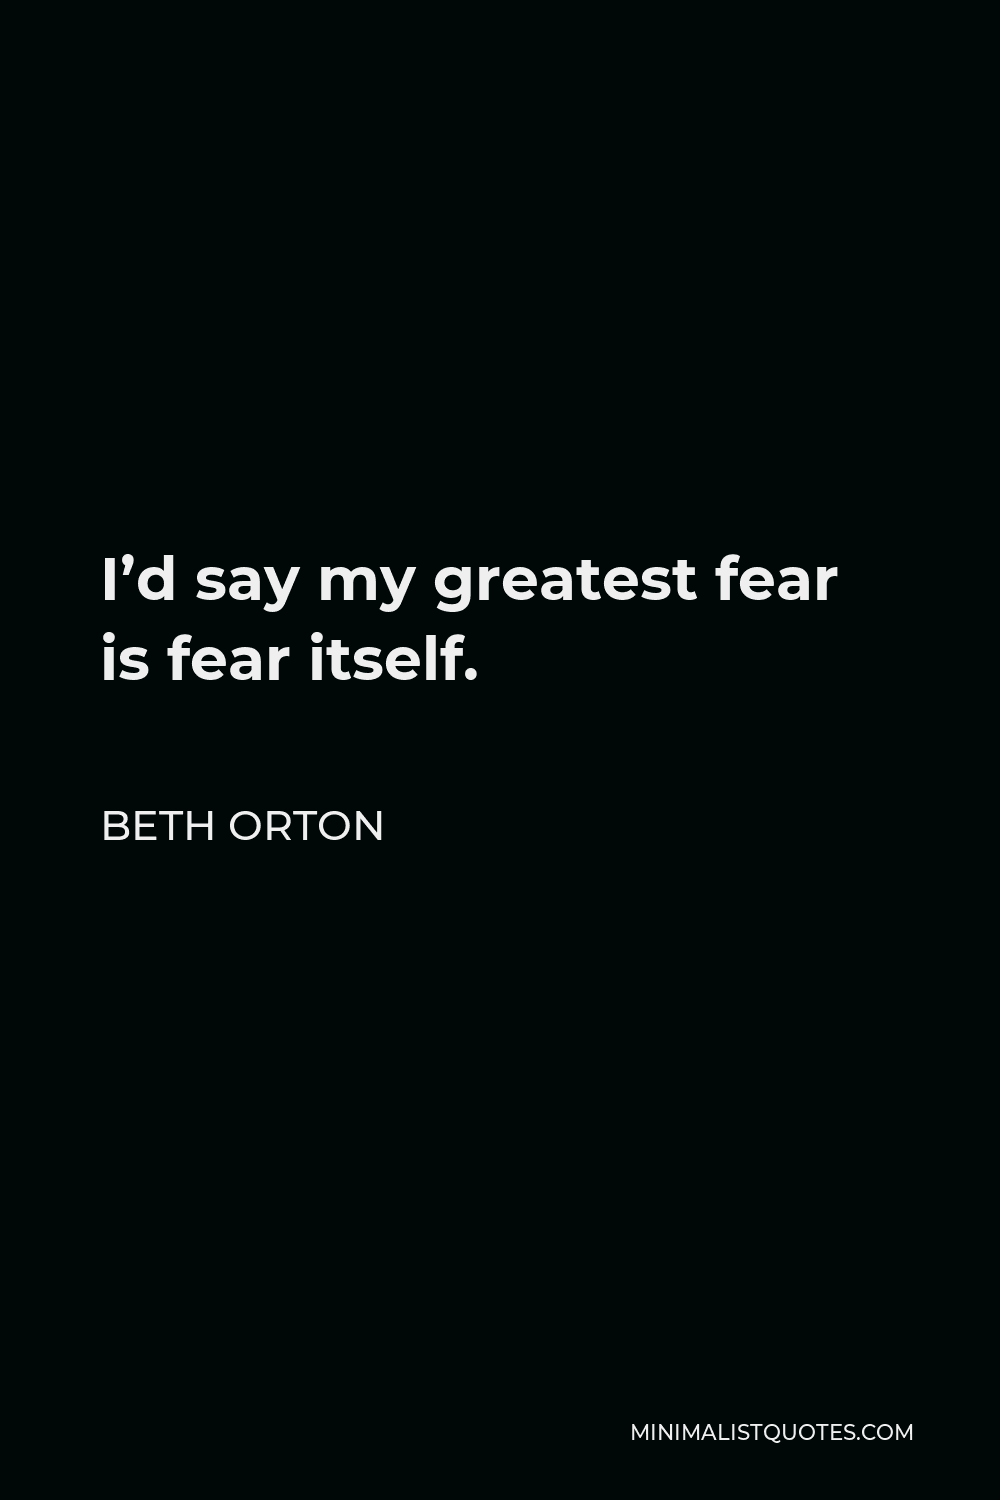 Beth Orton Quote - I’d say my greatest fear is fear itself.